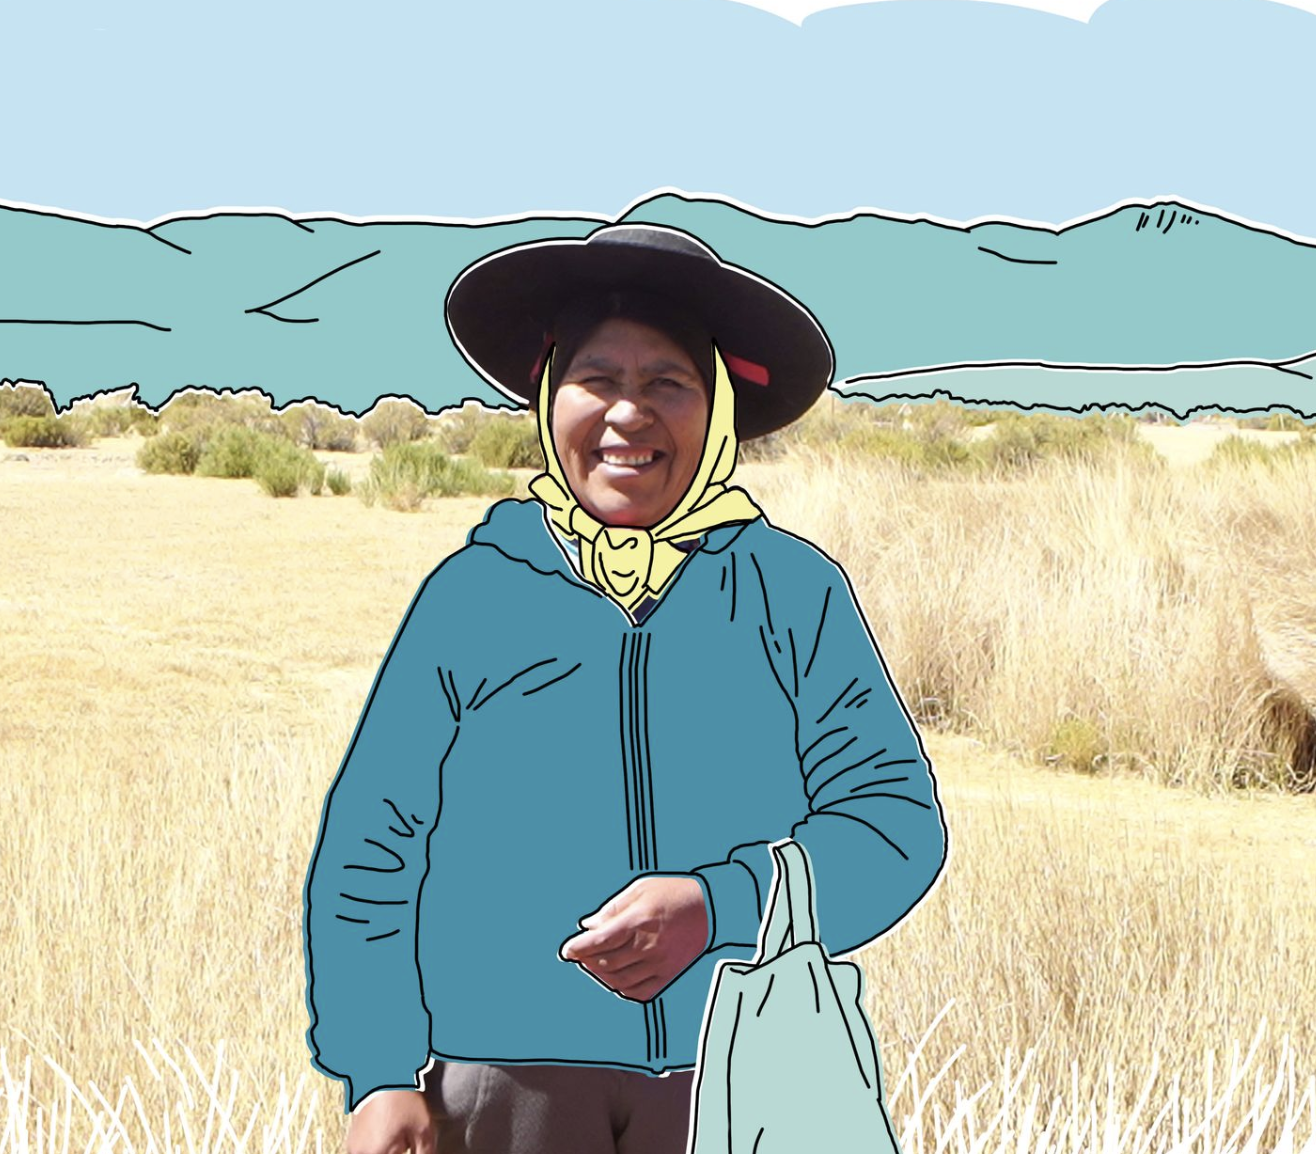 Illustration of woman wearing a hat and blue coat in a field of yellow grass